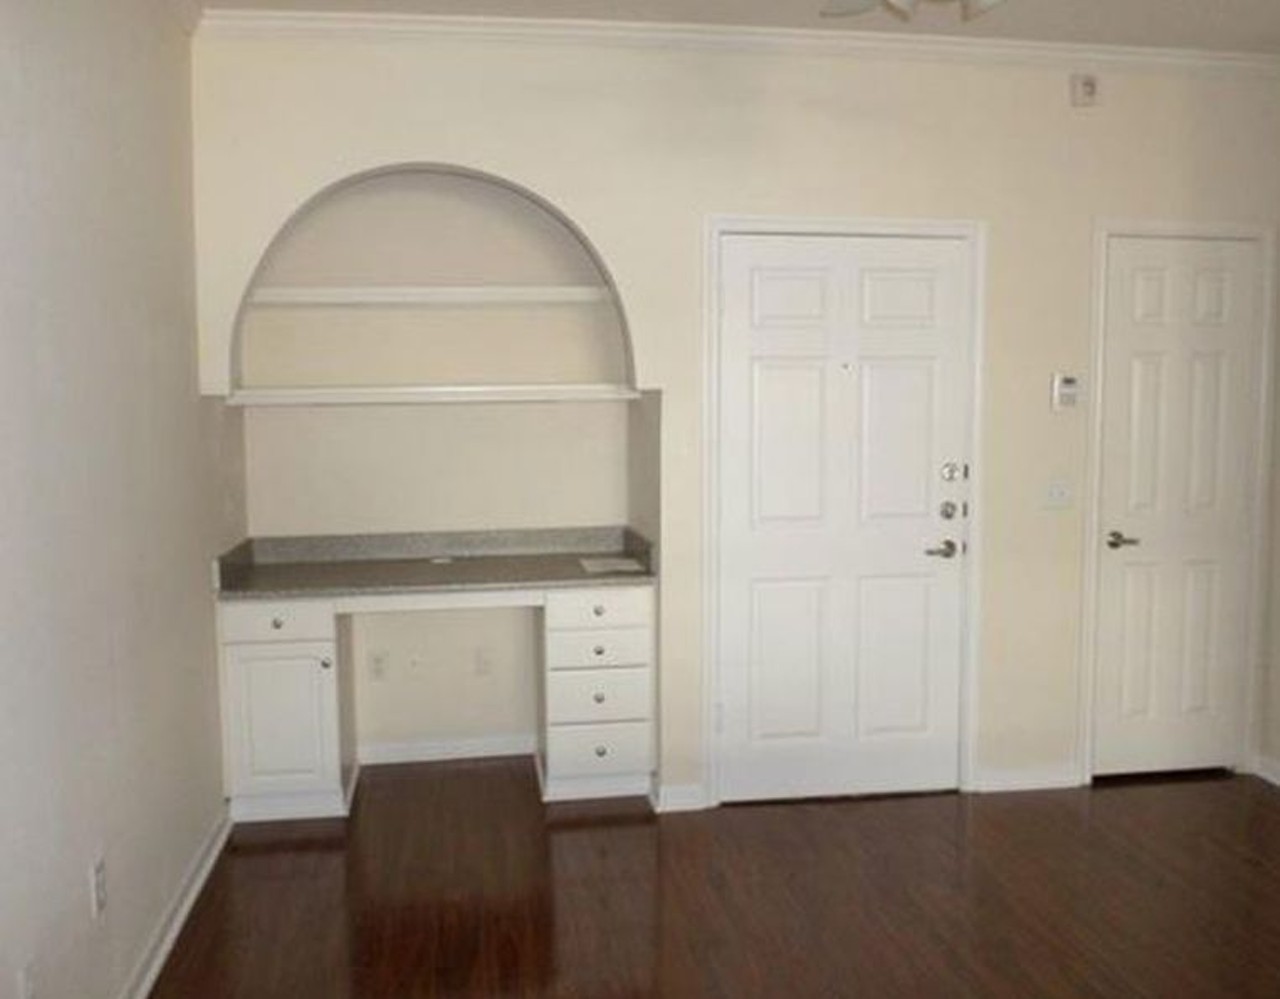 860 N Orange Ave, Orlando
$700/mo
1 bed, 1 bath, 700 sqft
Ever wish you had enough space for a desk in your bedroom? Well here you can with this area built into the master bedroom.